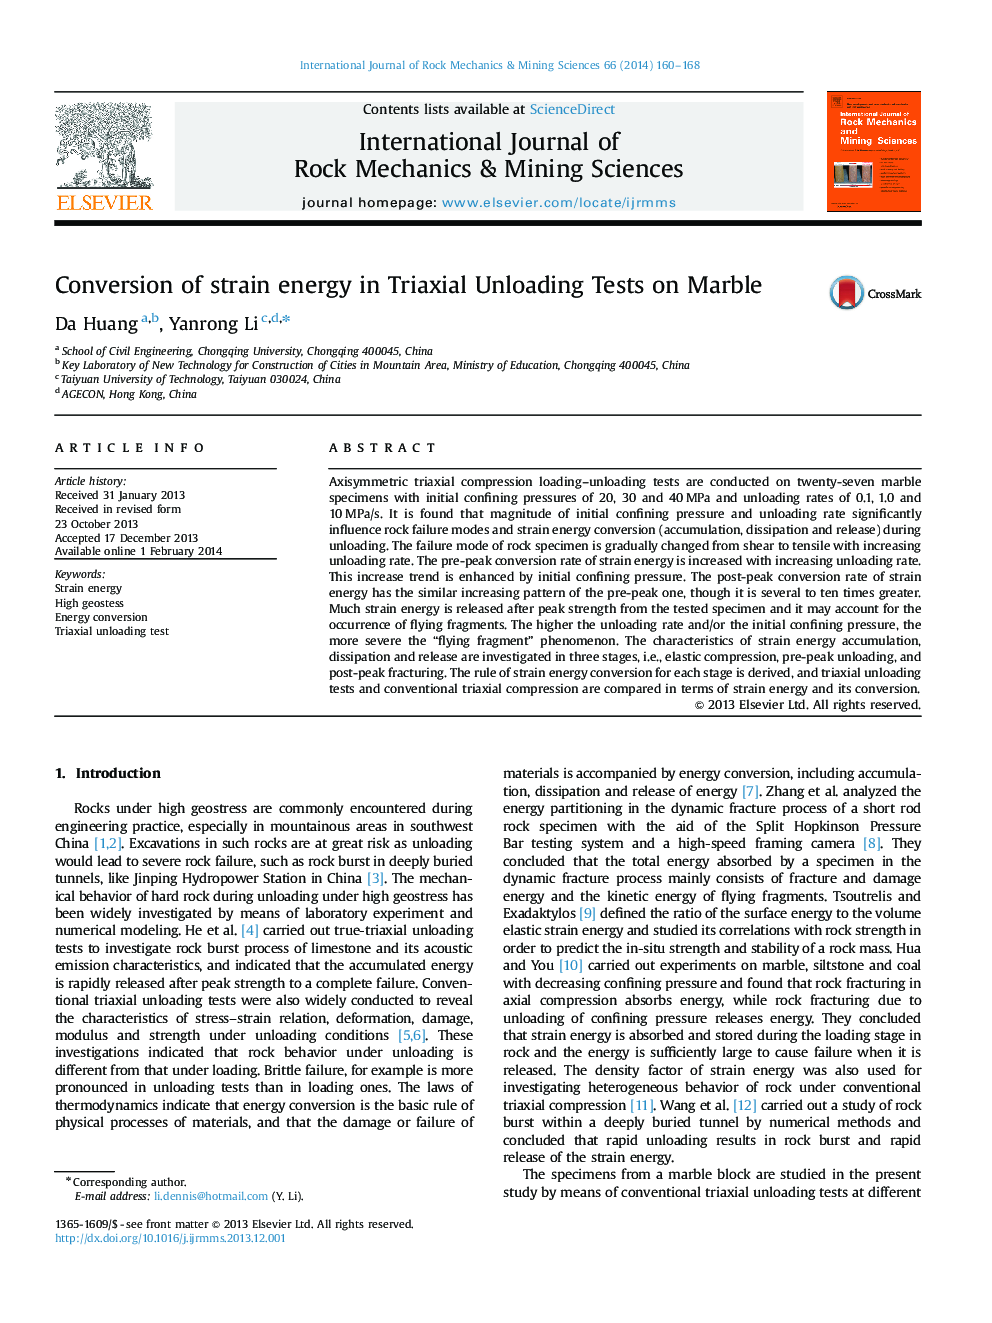 Conversion of strain energy in Triaxial Unloading Tests on Marble